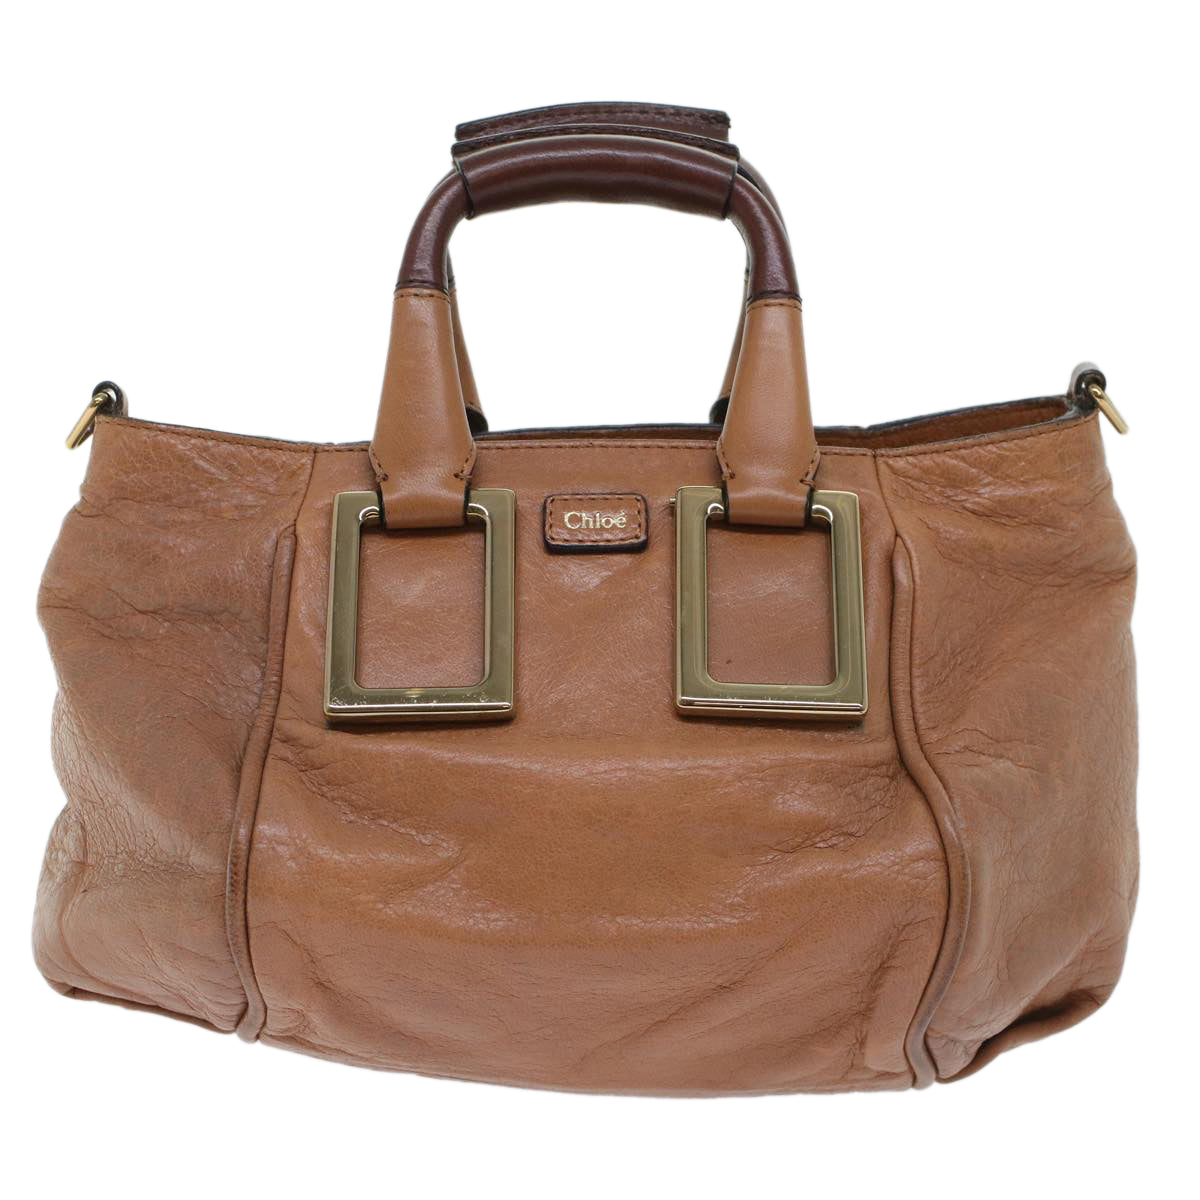 Chloe Etel Hand Bag Leather 2way Brown 03-12-50-65 Auth th4017 - 0